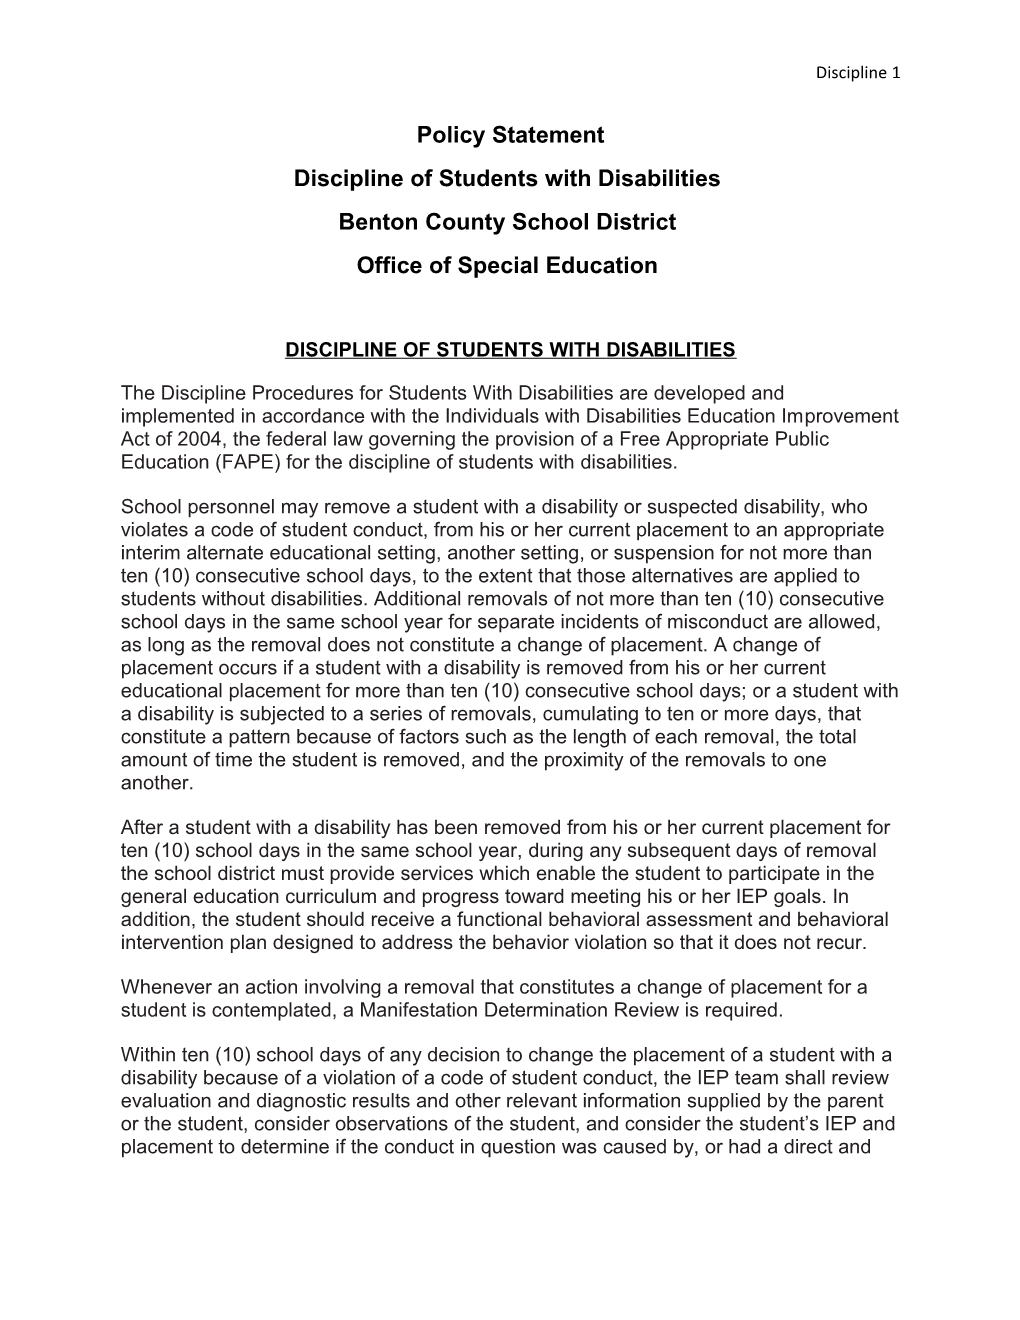 Discipline of Students with Disabilities